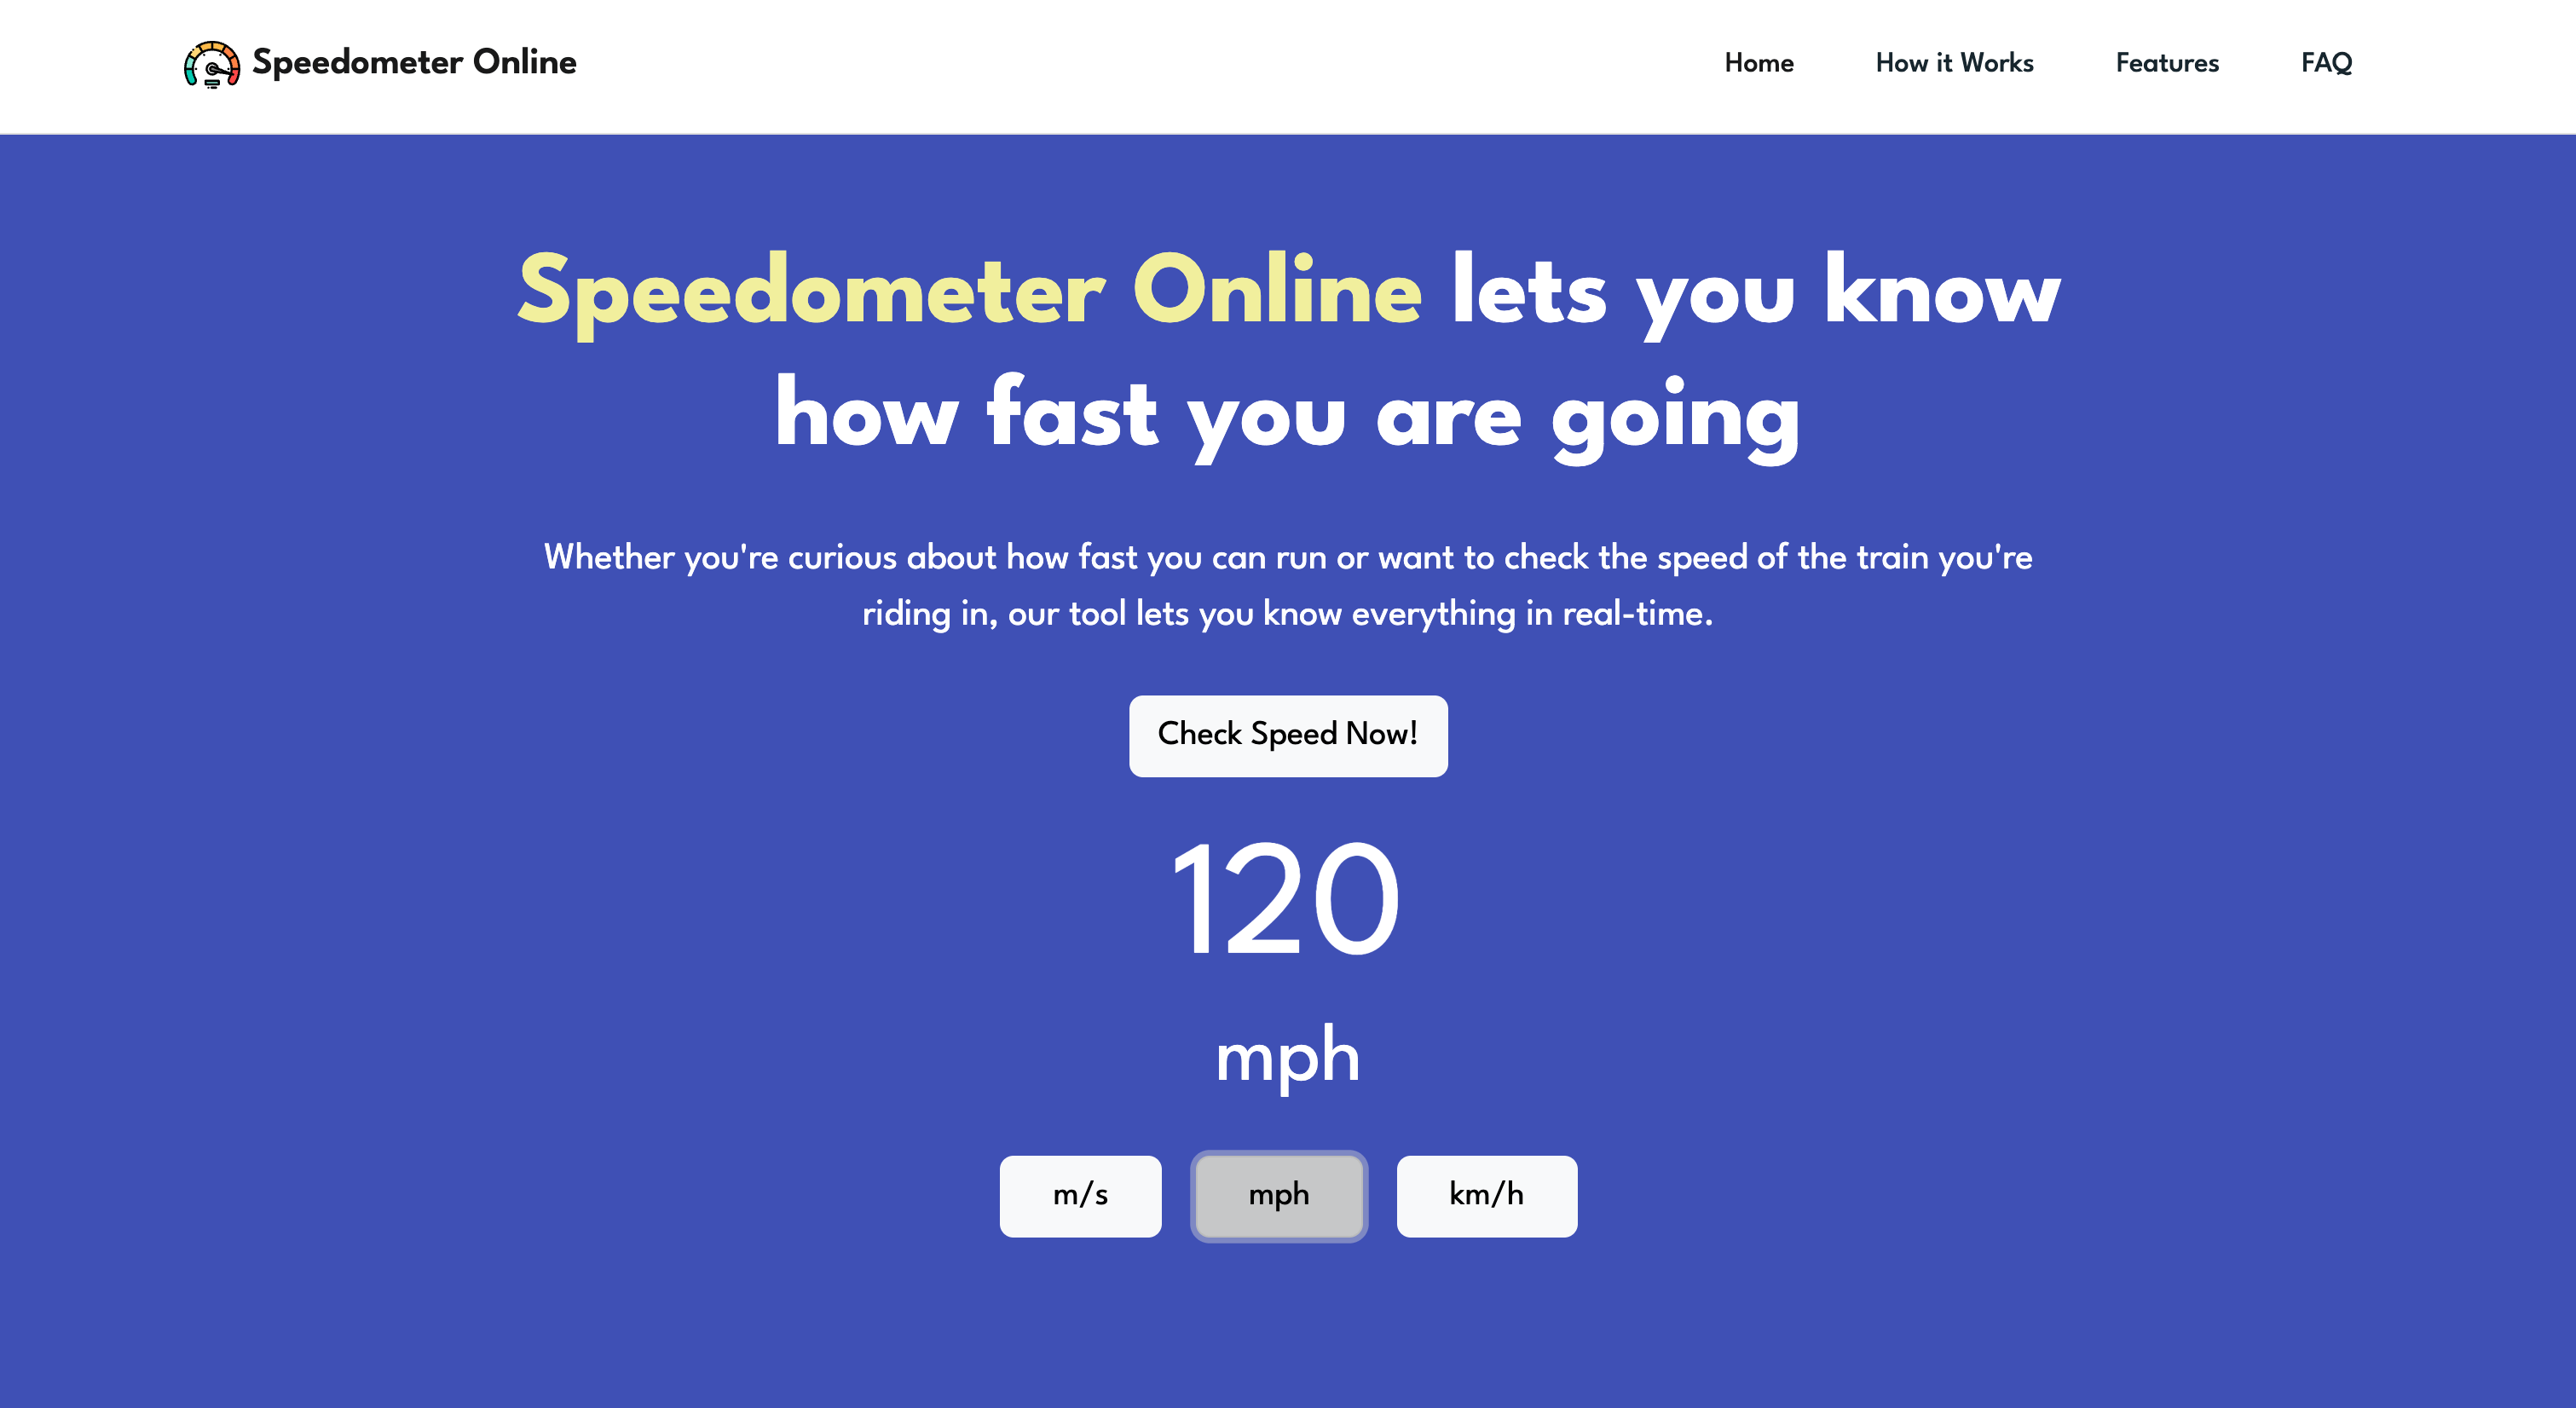 Speedometer Online - Real-time GPS Speedometer Checker in MPH, KPH, and m/s